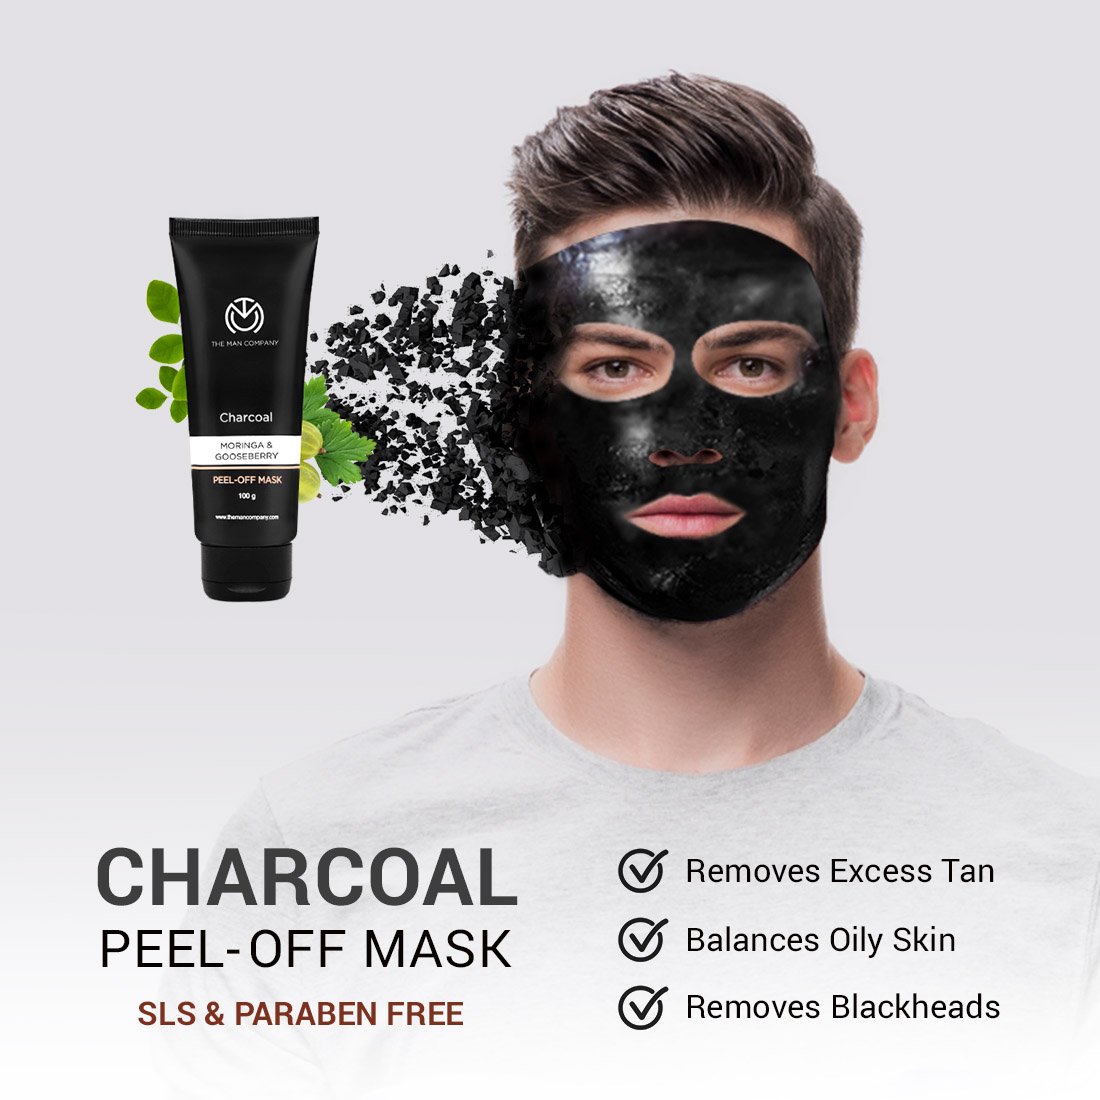 Charcoal face mask | Charcoal face mask, Beautycounter 